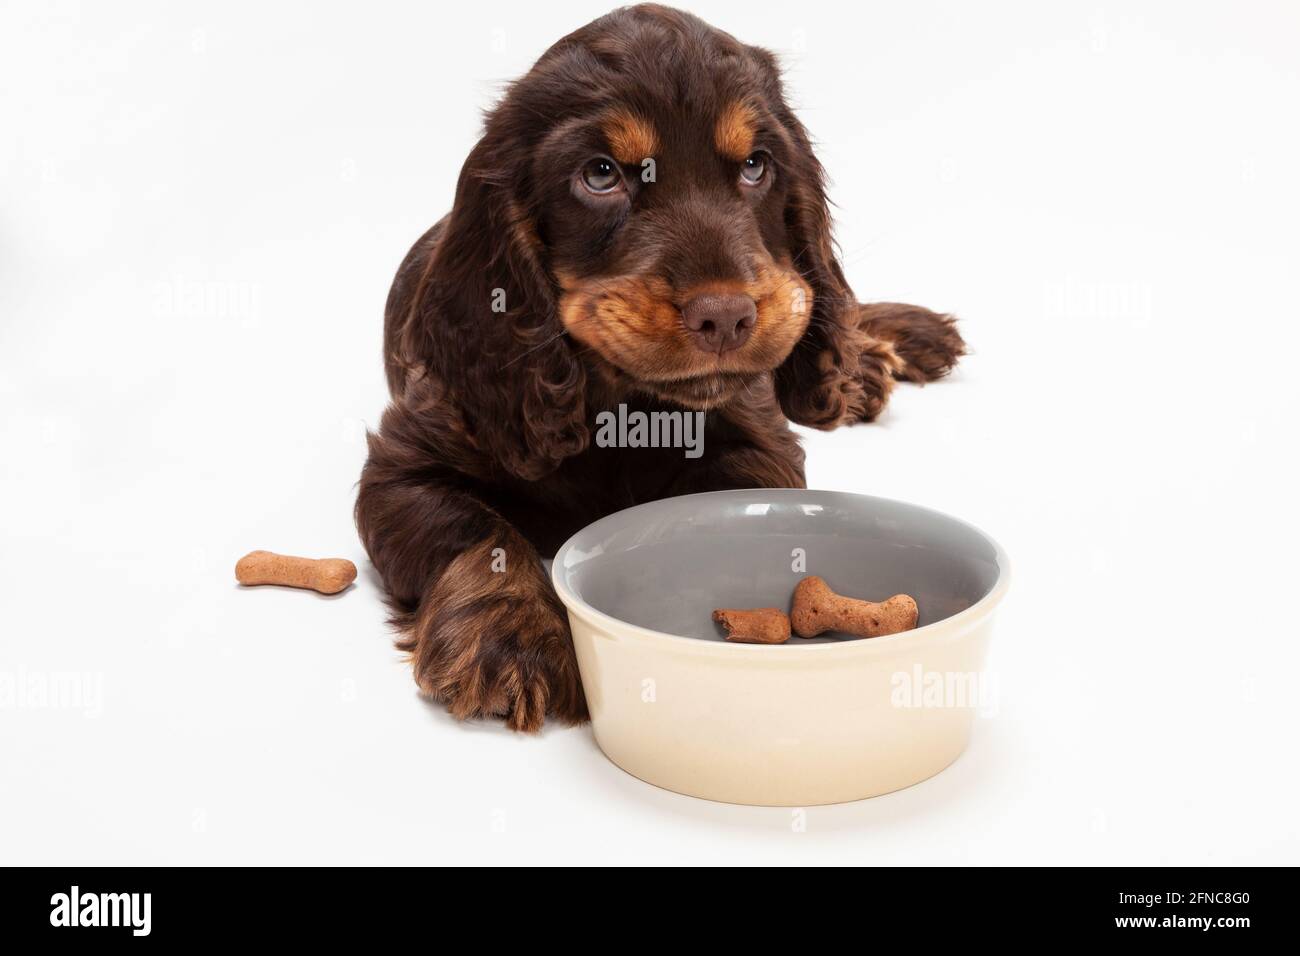 Cute Cocker Spaniel puppy dog looking up from eating boned shaped biscuits in dog bowl Stock Photo